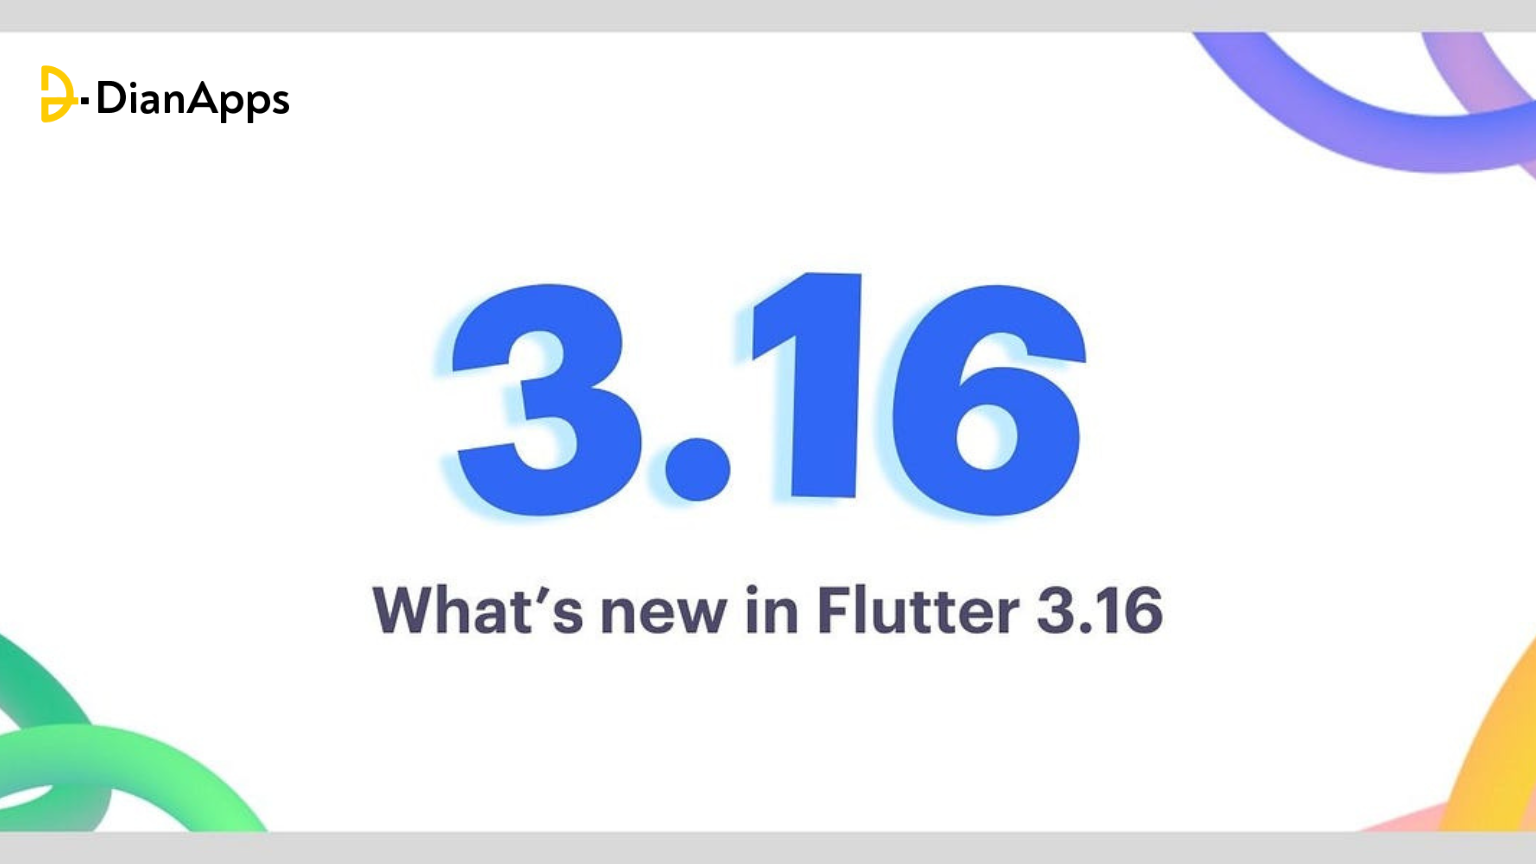 What’s new in Flutter 3.16